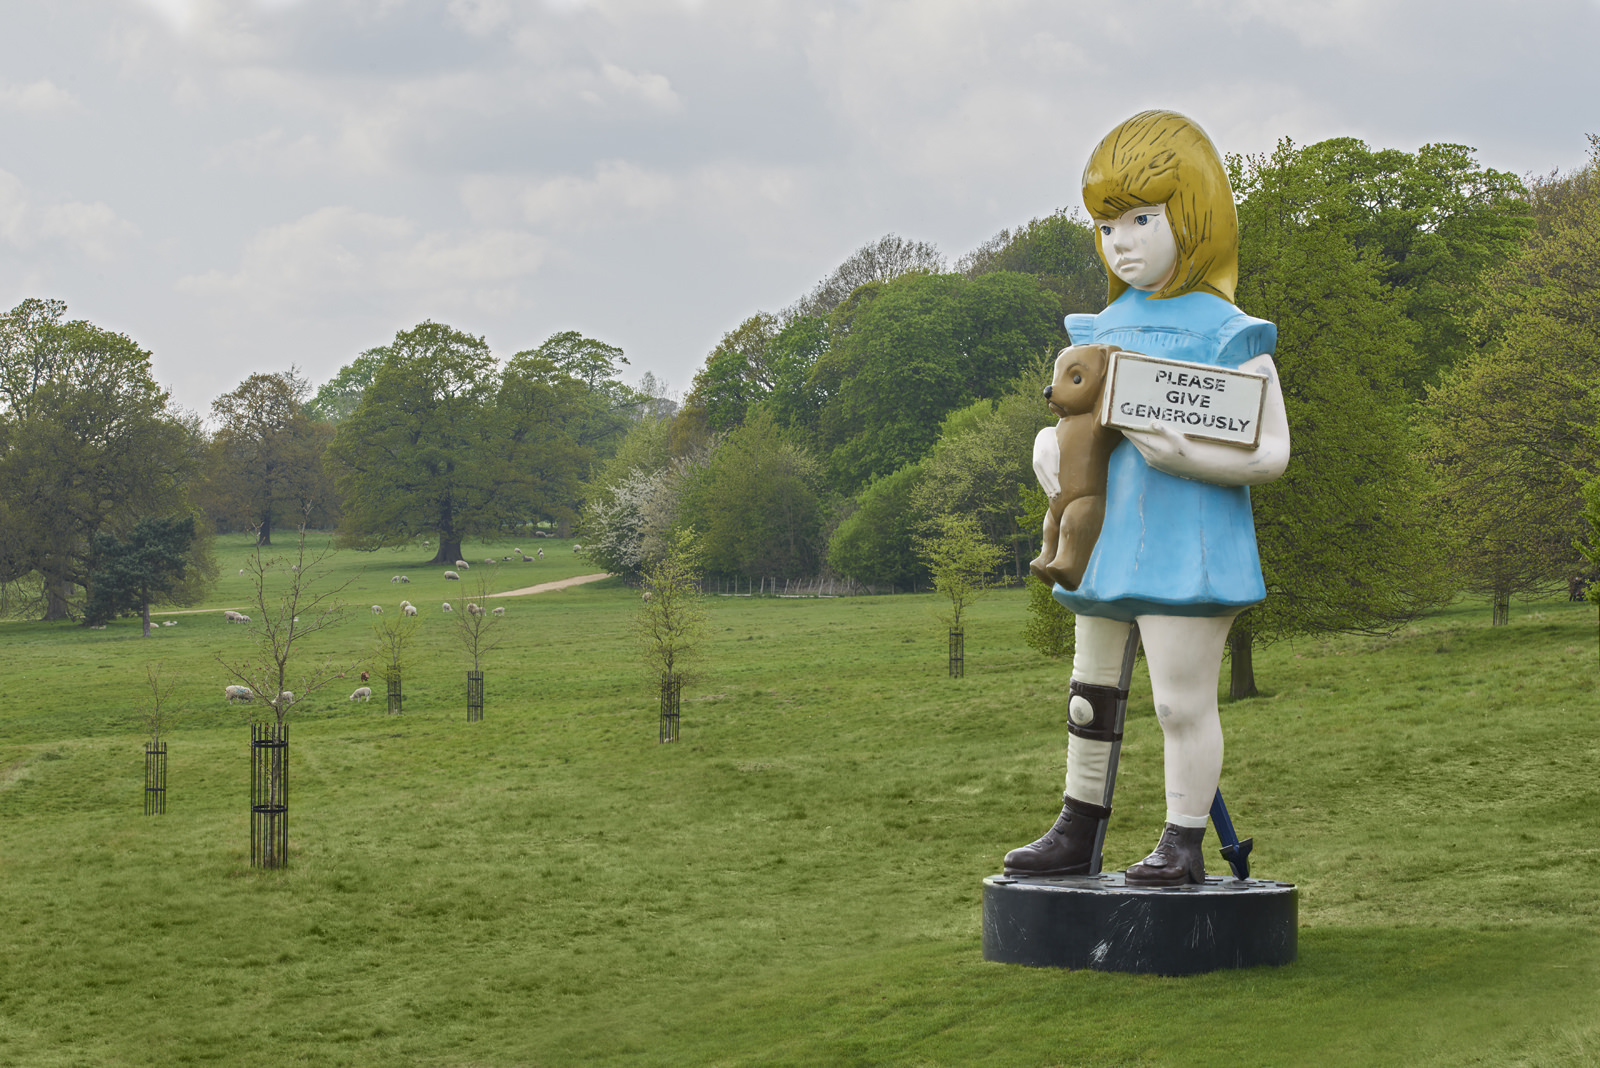 Sculpture of a young girl holding a teddy bear and a charity box, among saplings in YSP parkland.